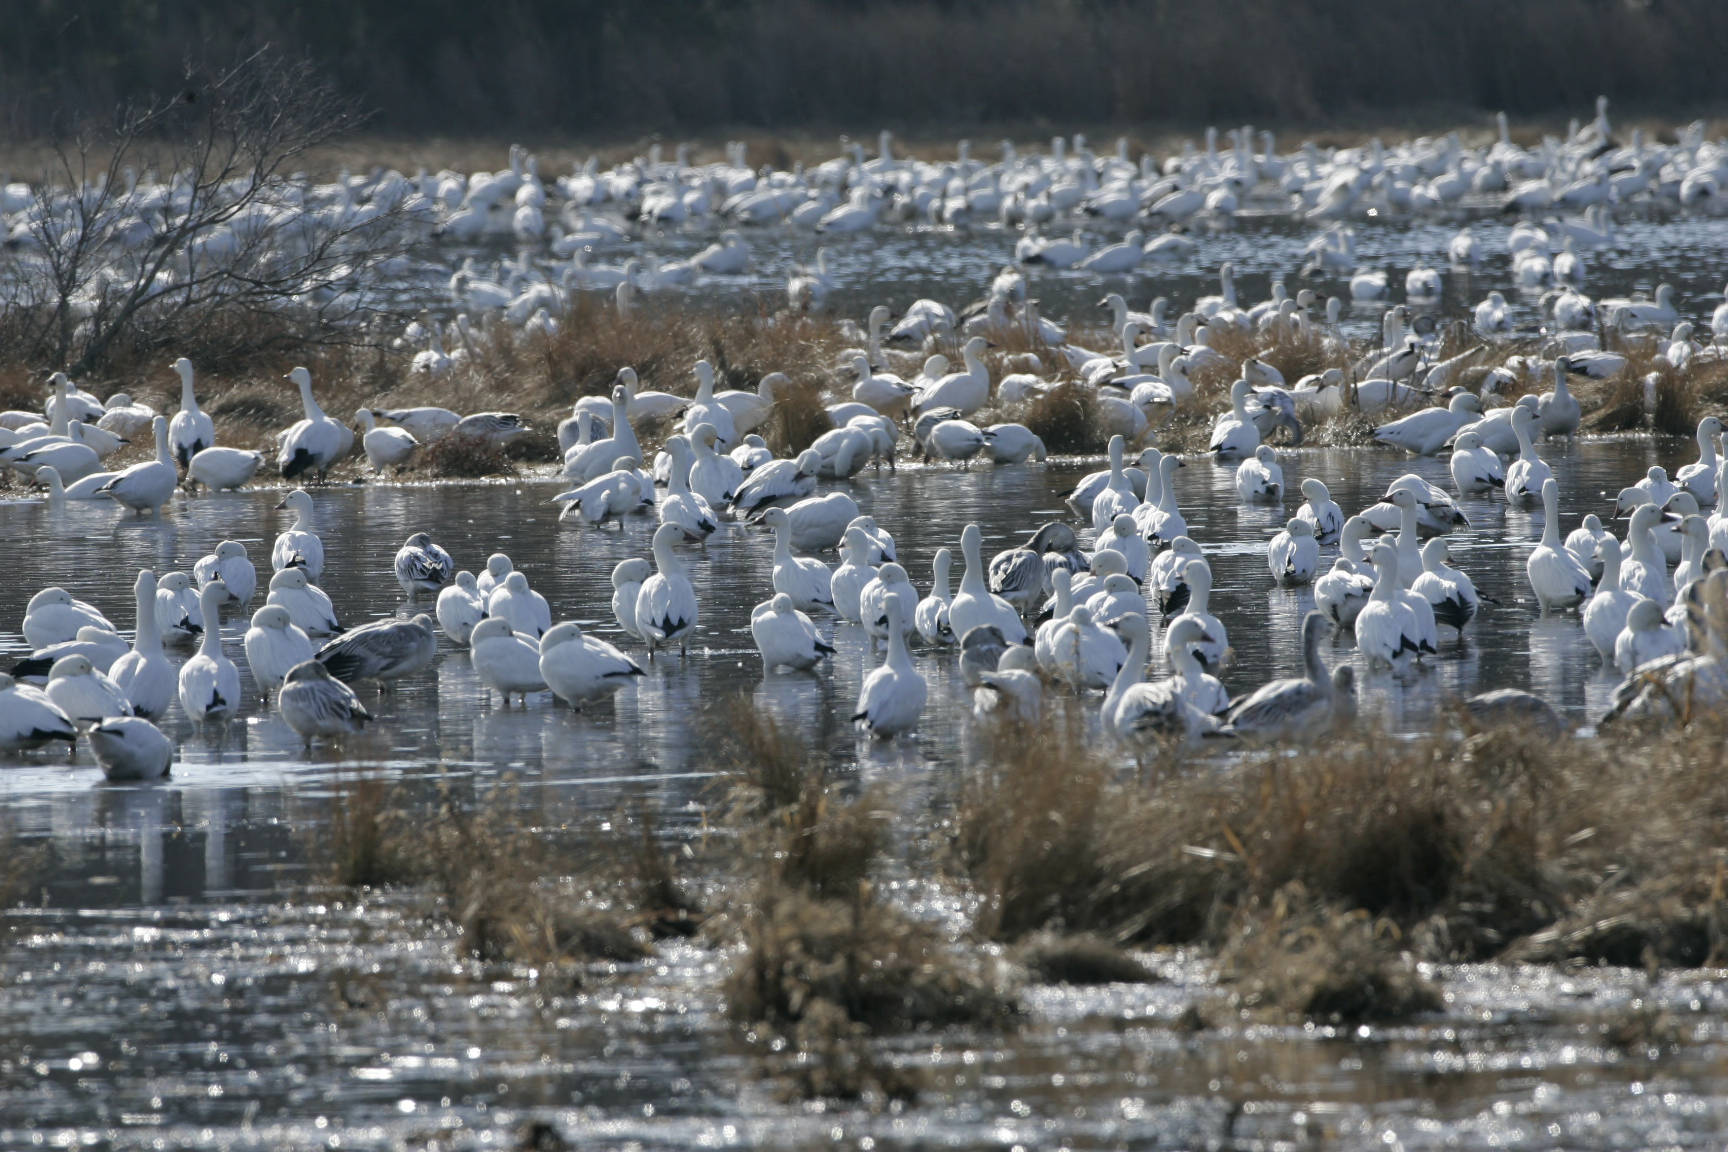 Snow geese are more apt to contract avian influenza.